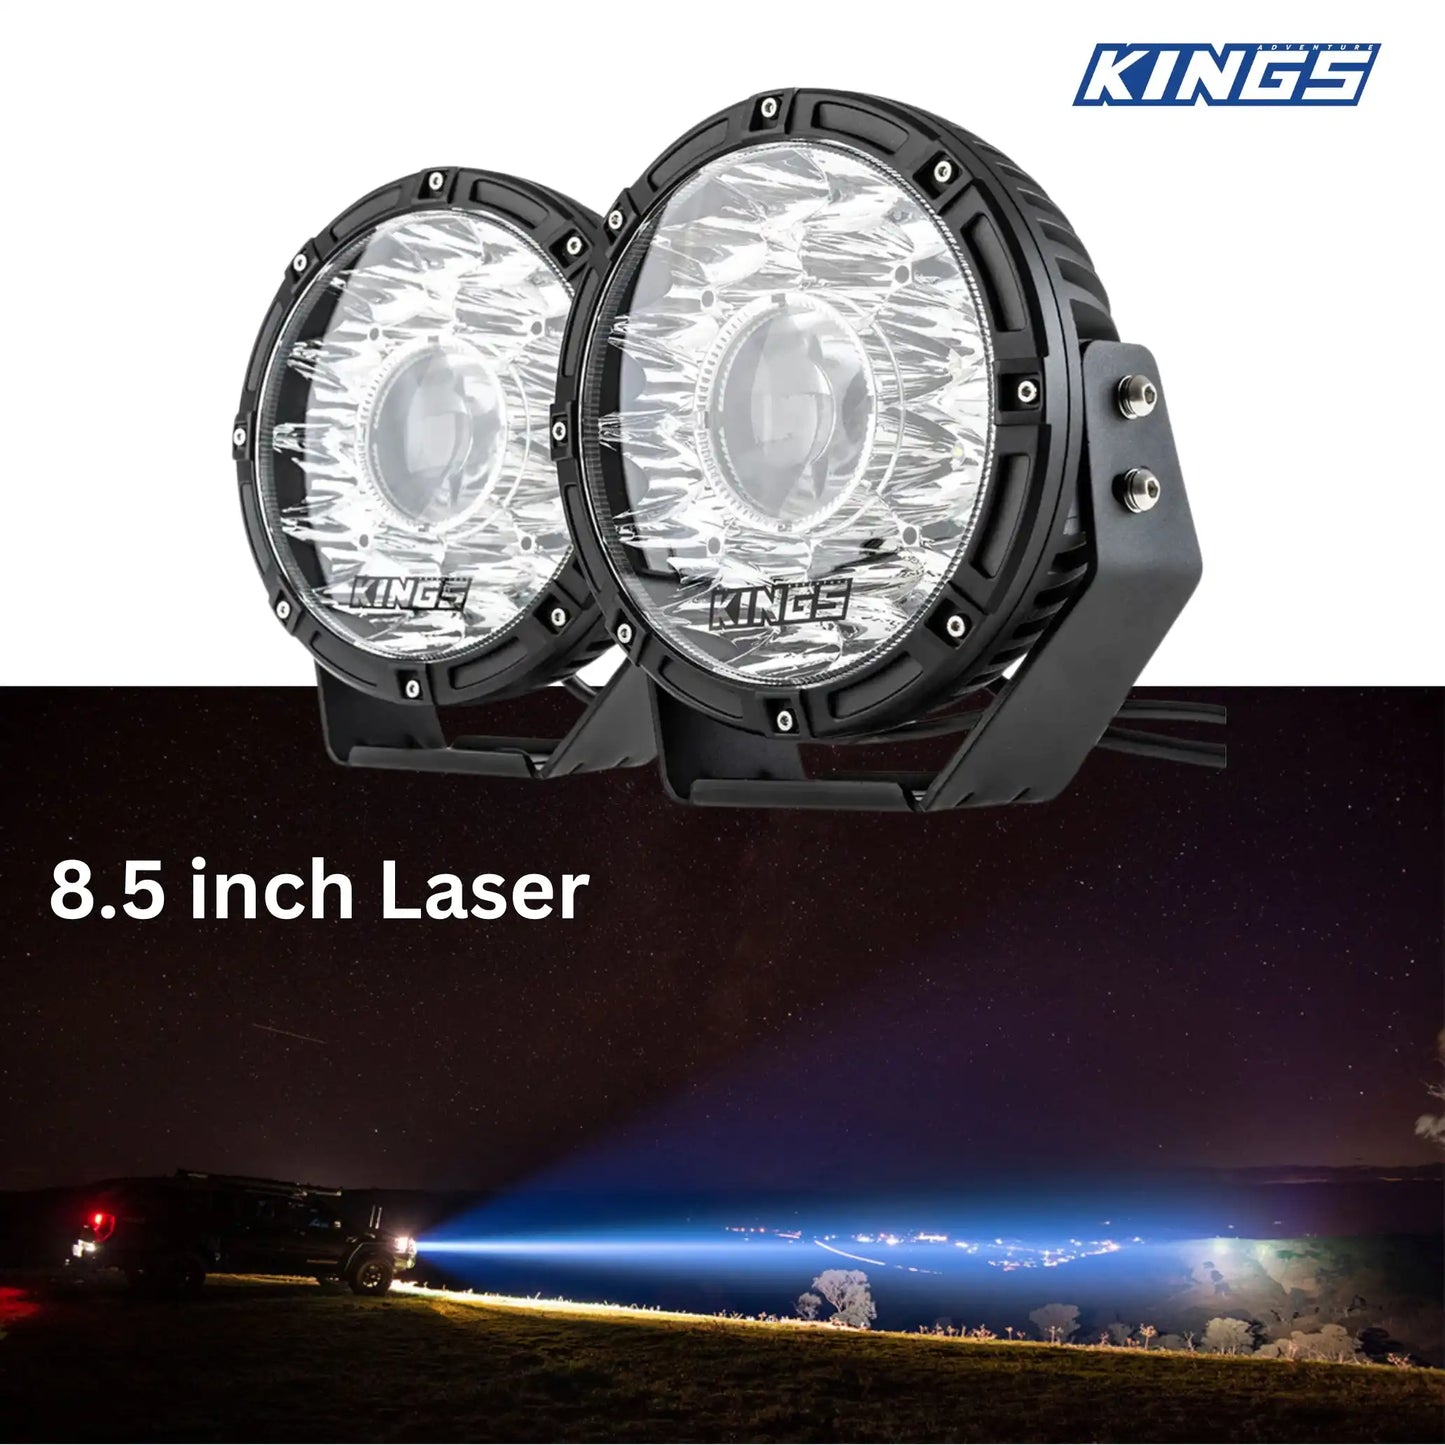 Kings 8.5 inch Laser MKII Driving Lights